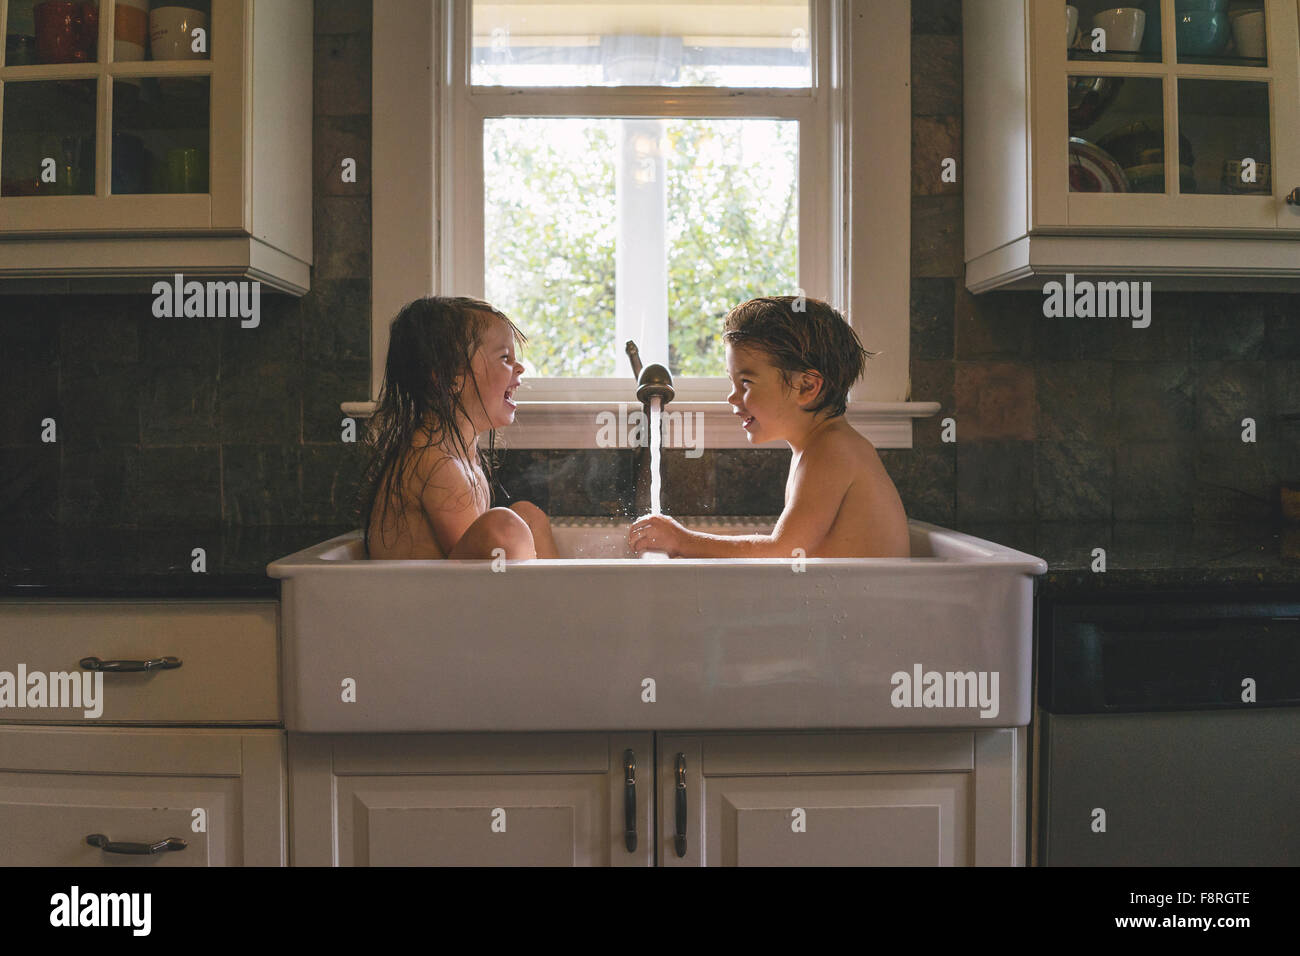 Young boy and girl sitting in kitchen sink playing with water Stock Photo